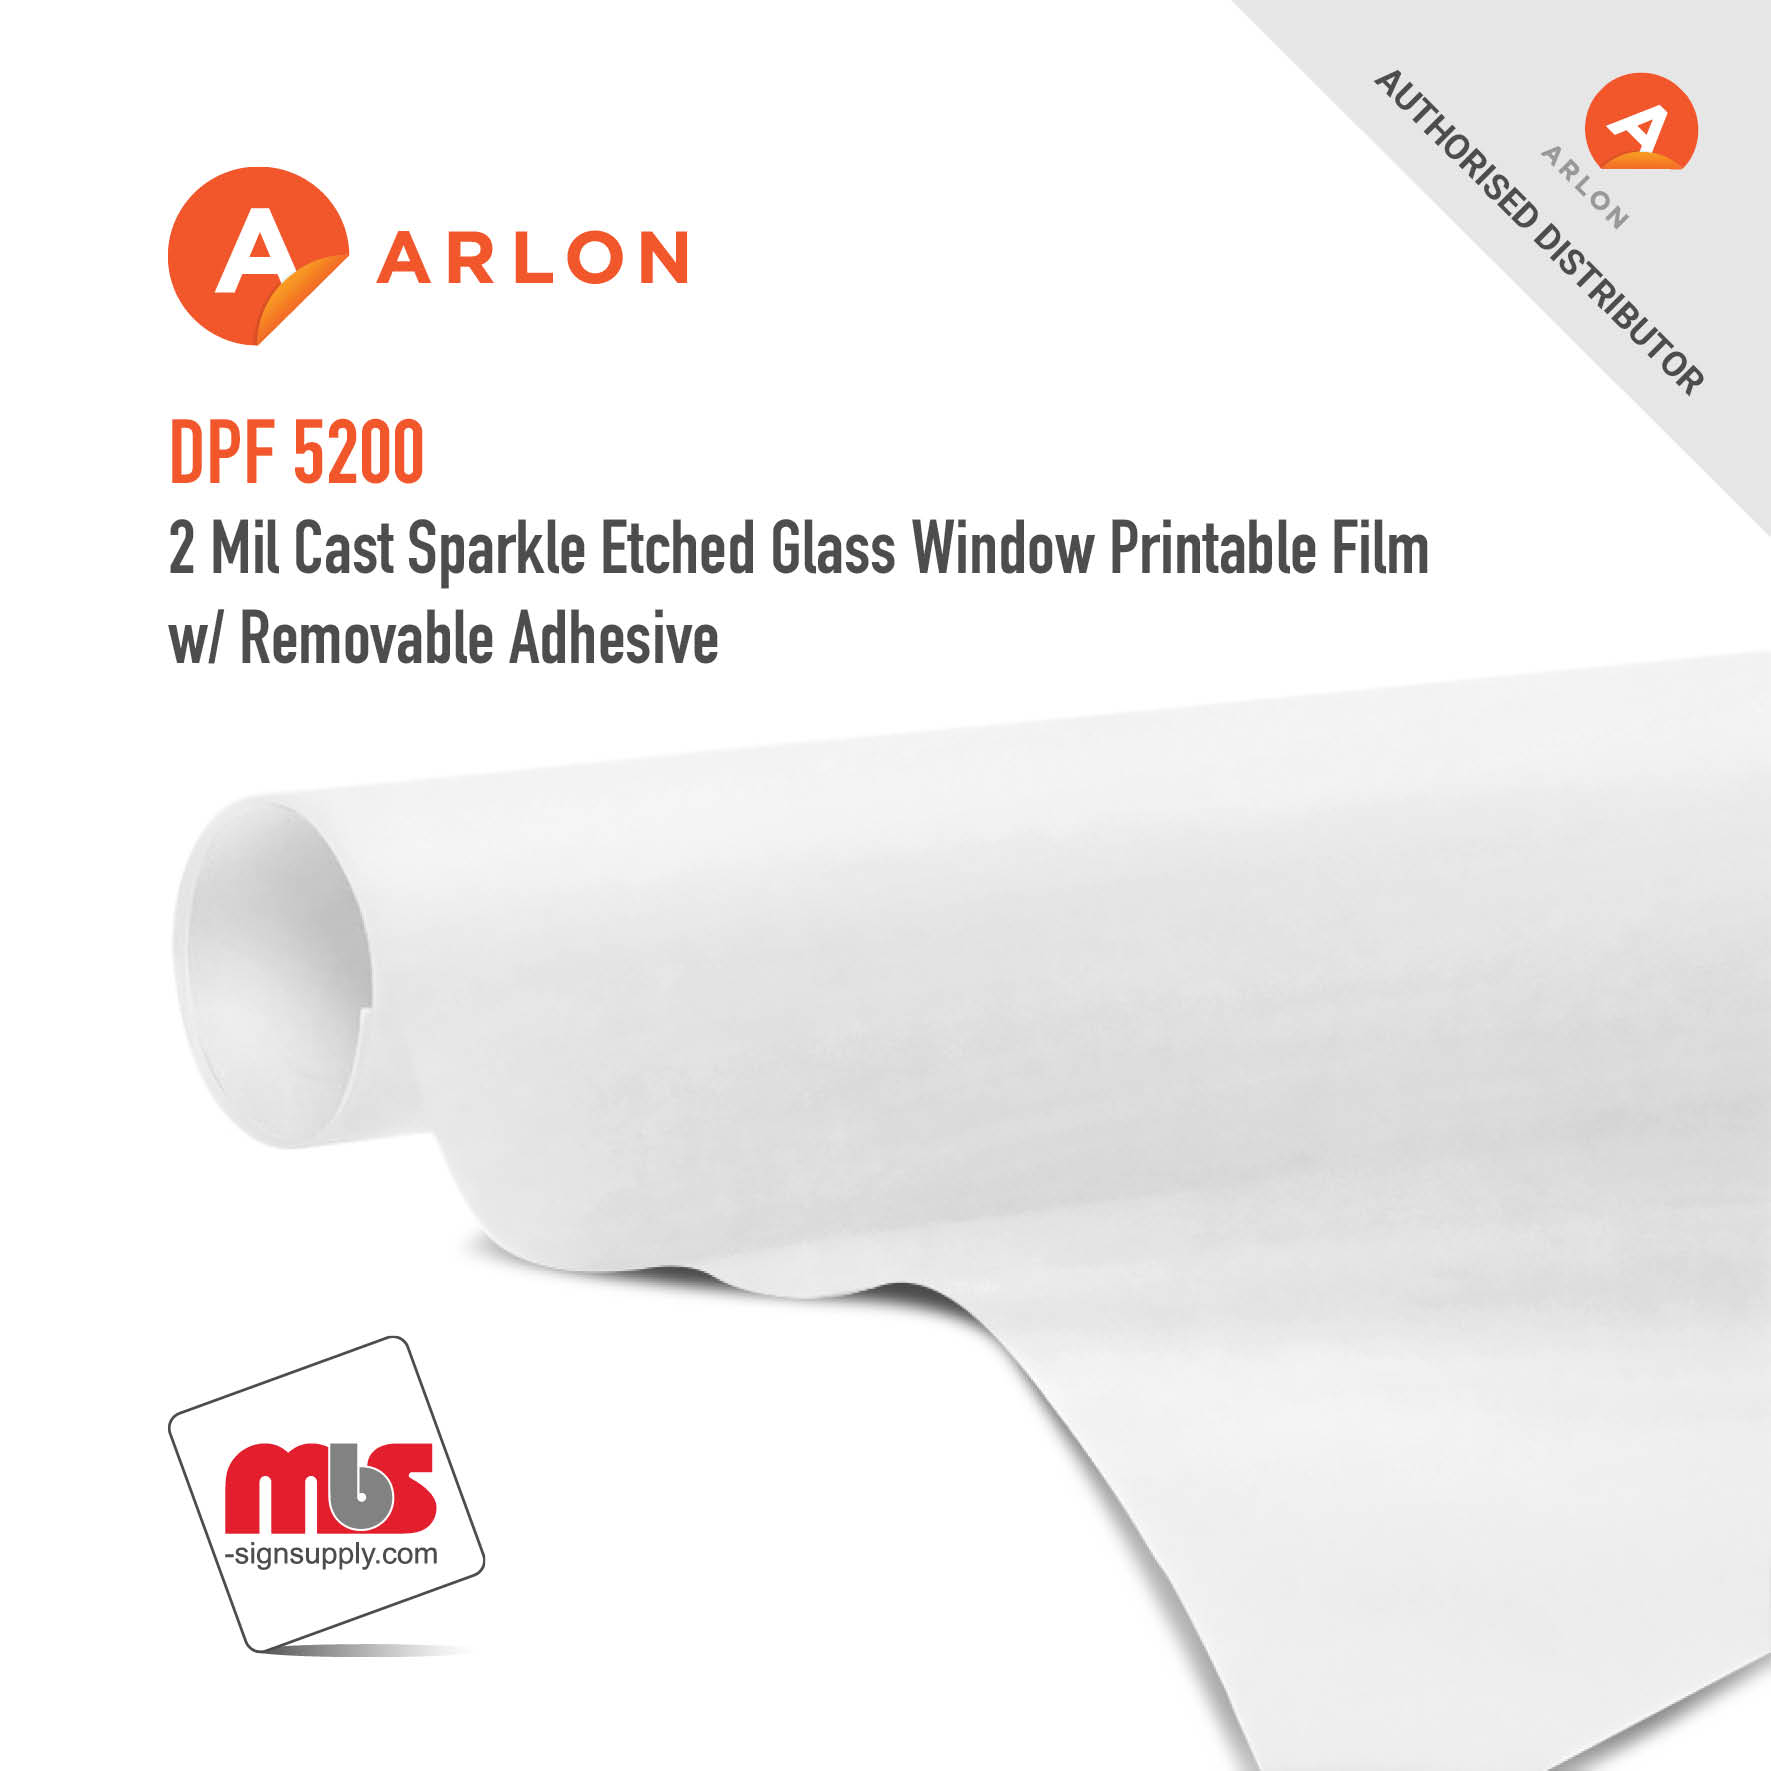 24'' x 50 Yard Roll - Arlon DPF 5200 2 Mil Cast Sparkle Etched Glass Window Printable Film w/ Removable Adhesive